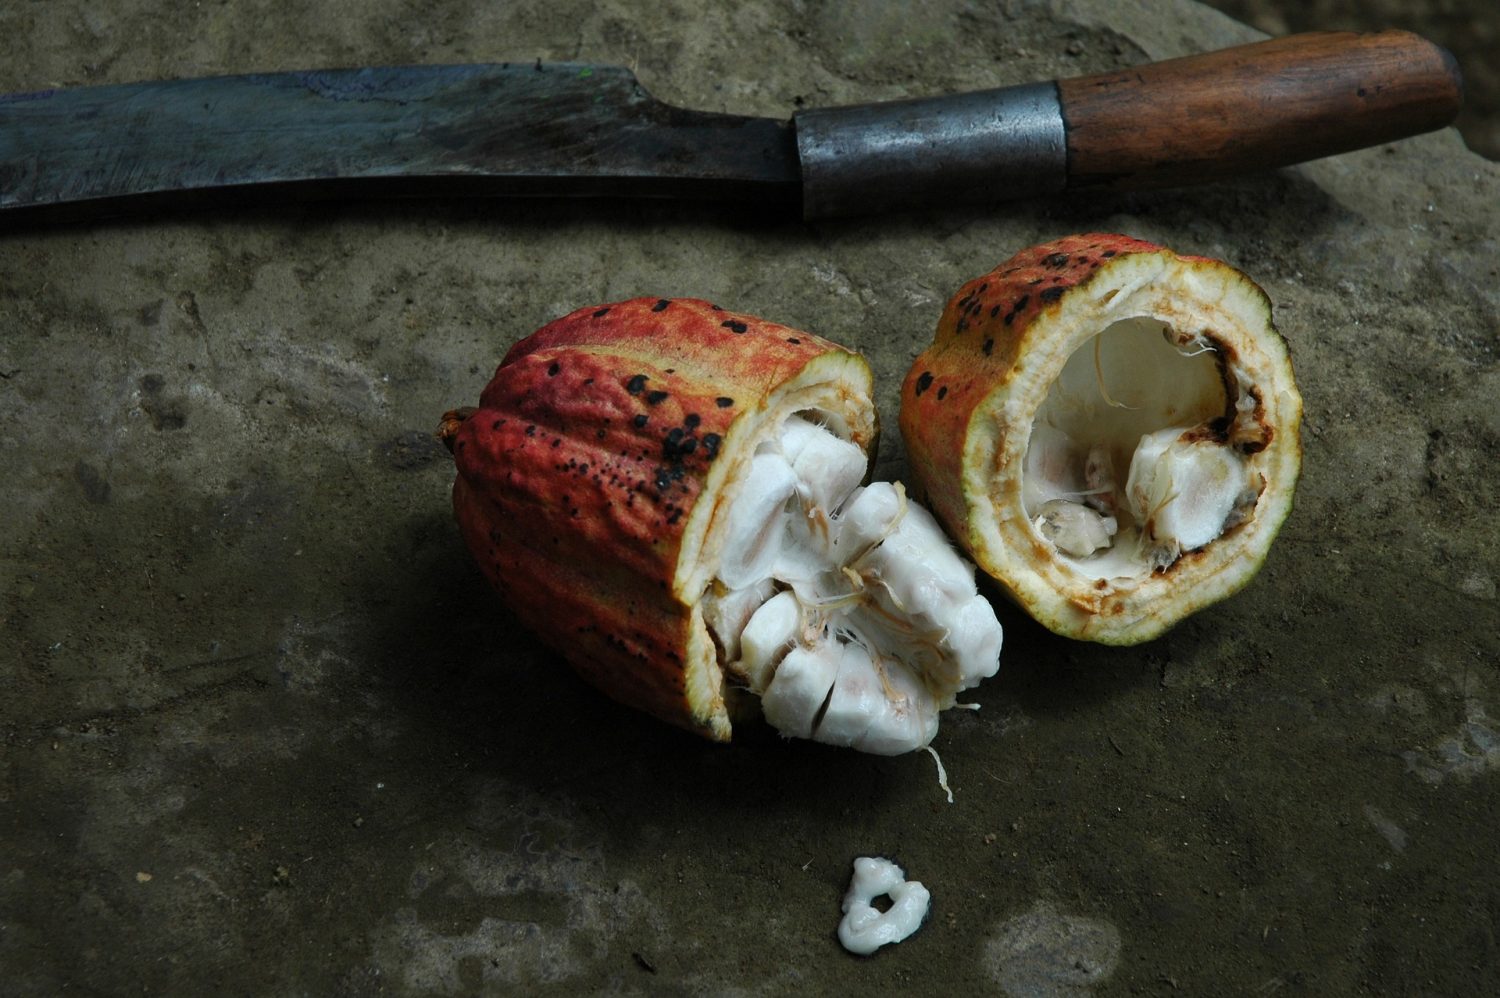 cocoa-fruit-cut-in-half-and-knife